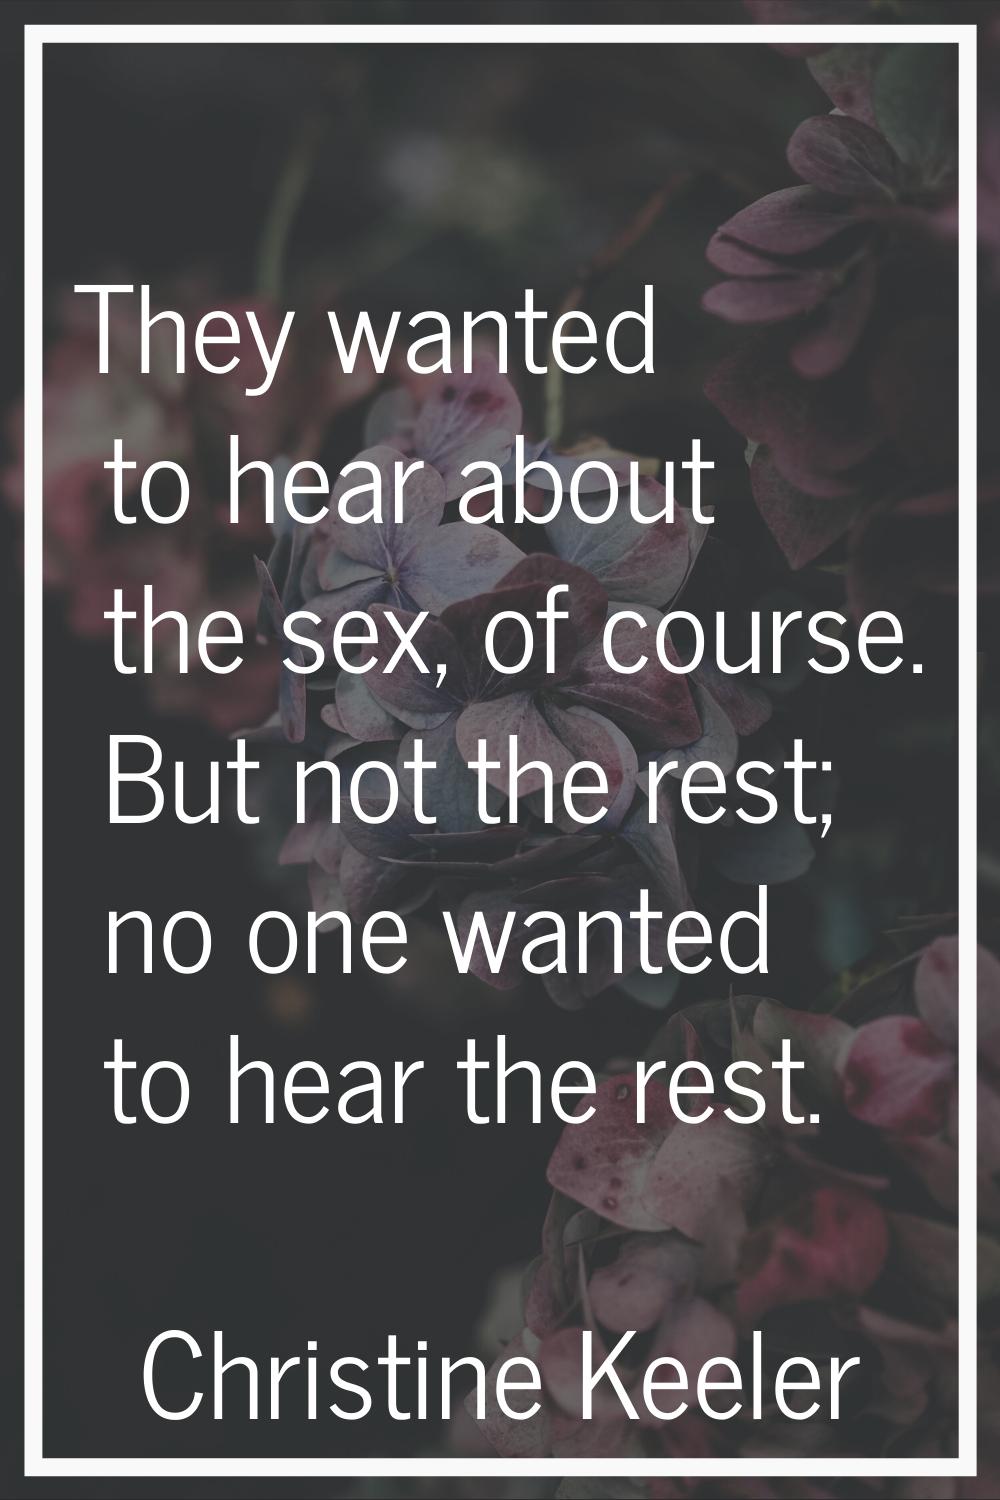 They wanted to hear about the sex, of course. But not the rest; no one wanted to hear the rest.